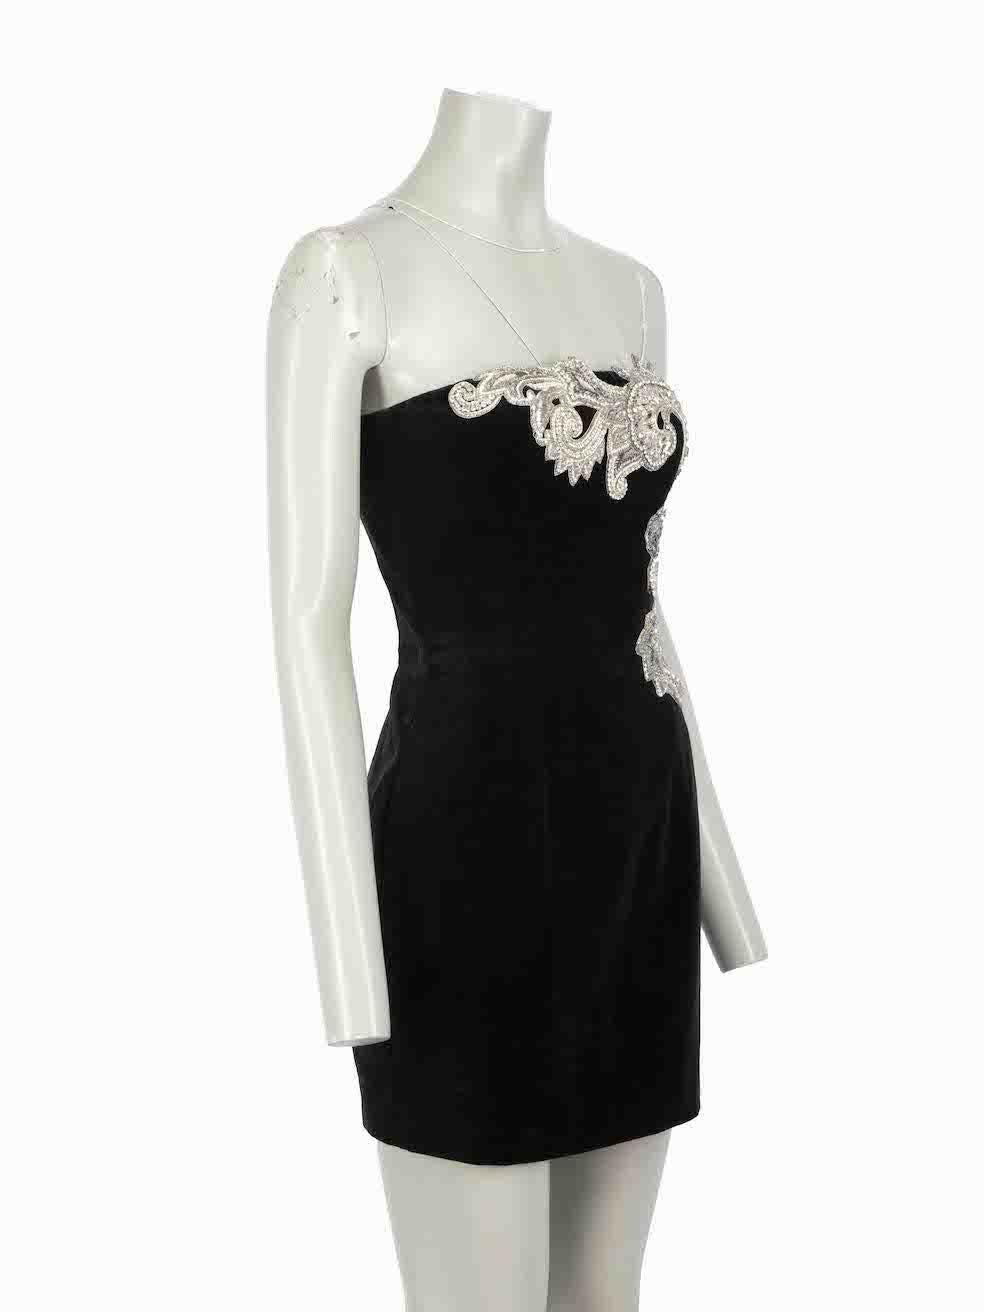 CONDITION is Very good. Minimal wear to dress is evident. Minimal wear to the embellishment with two missing crystals on this used Balmain designer resale item.
 
Details
Black
Velvet
Dress
Strapless
Figure hugging fit
Mini
Silver crystal